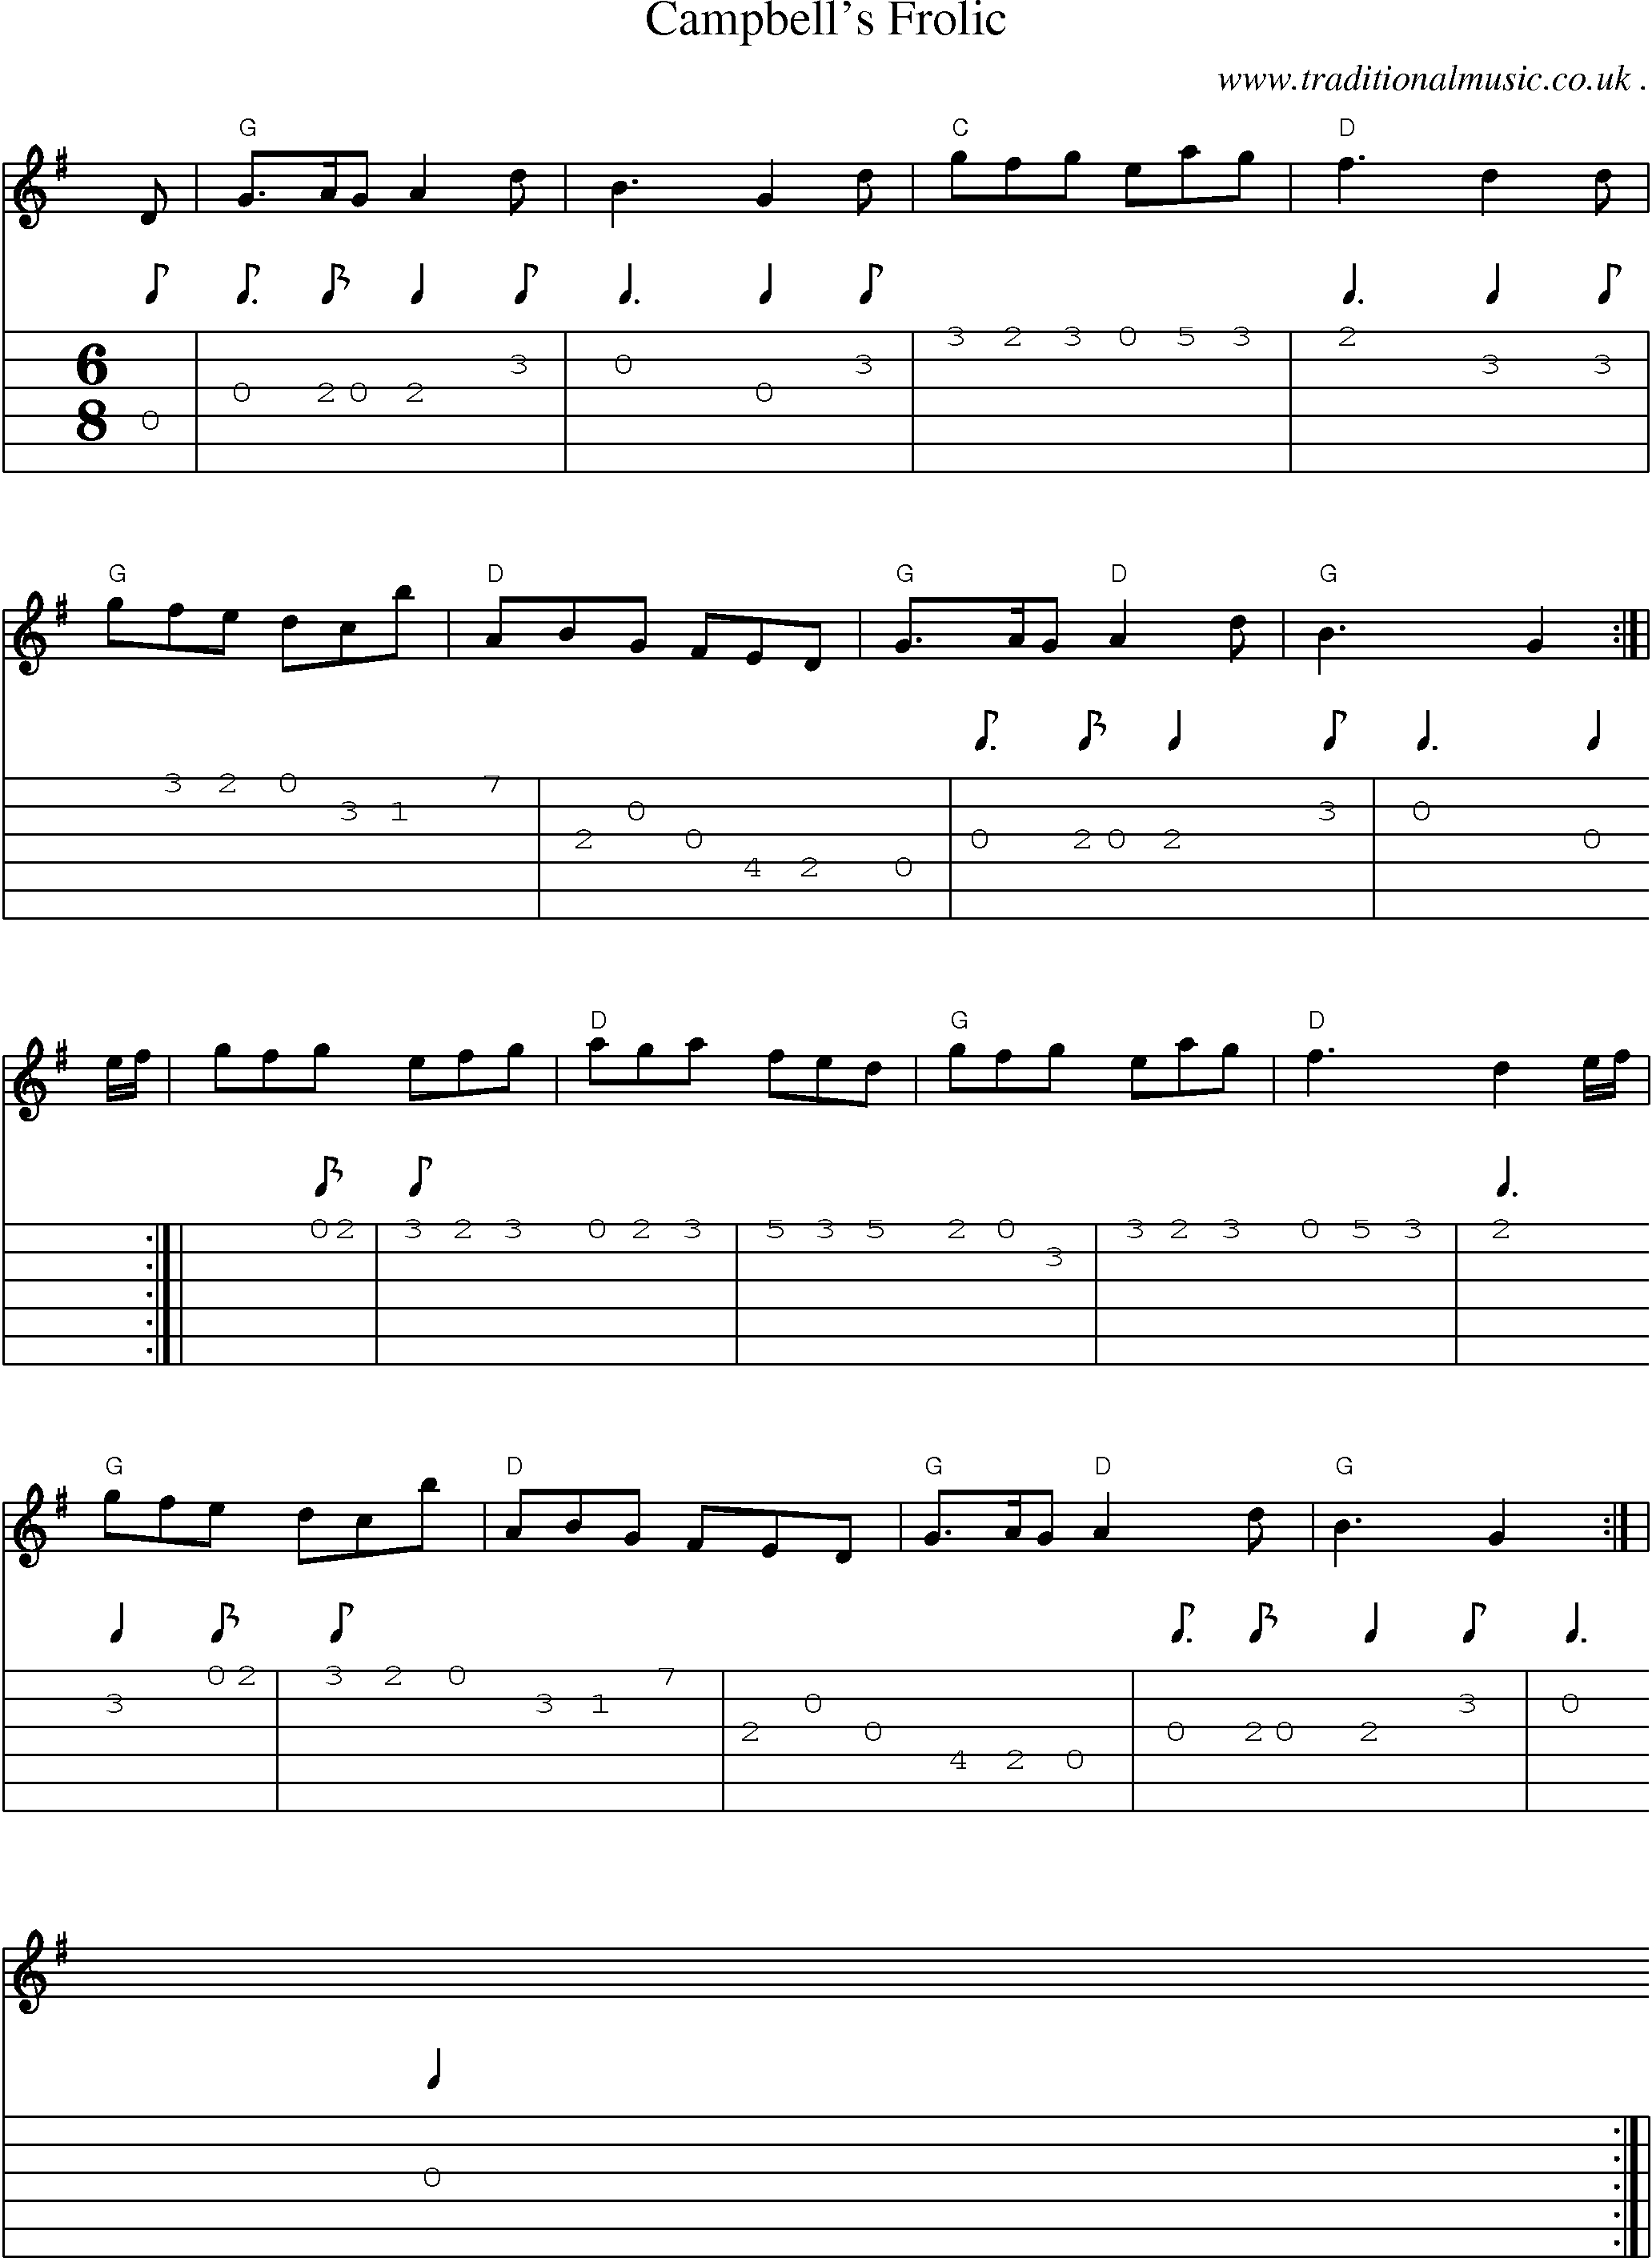 Sheet-music  score, Chords and Guitar Tabs for Campbells Frolic